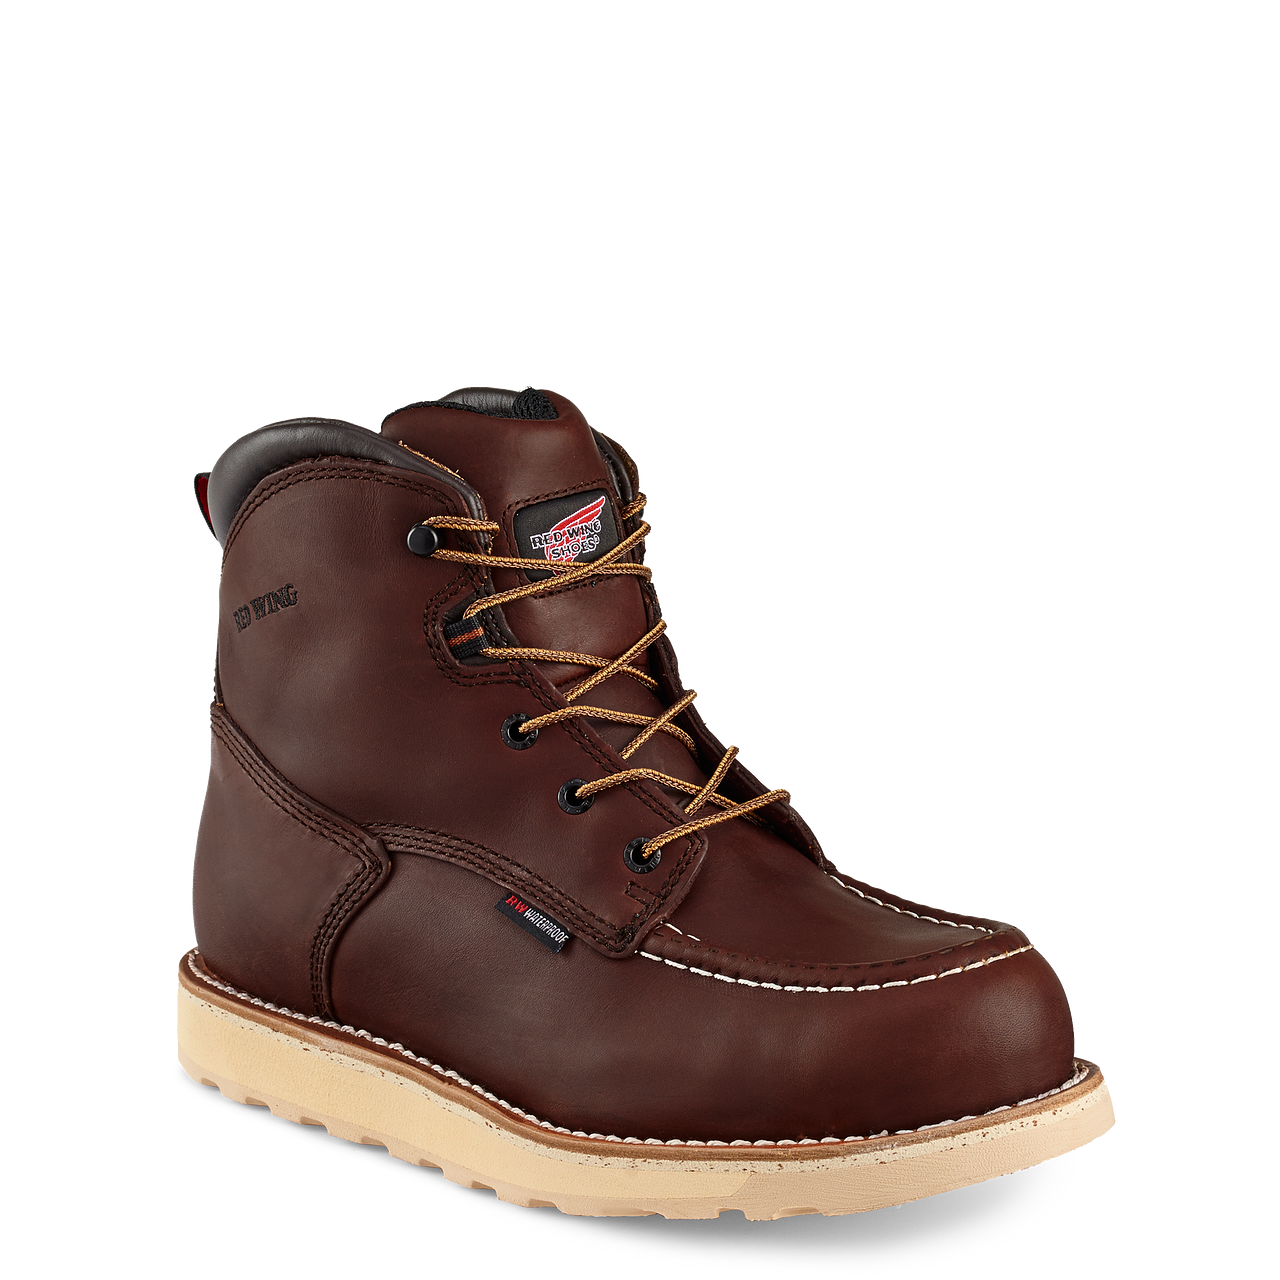 Red Wing 405 Traction Tred 6-Inch Waterproof Soft Toe Boot